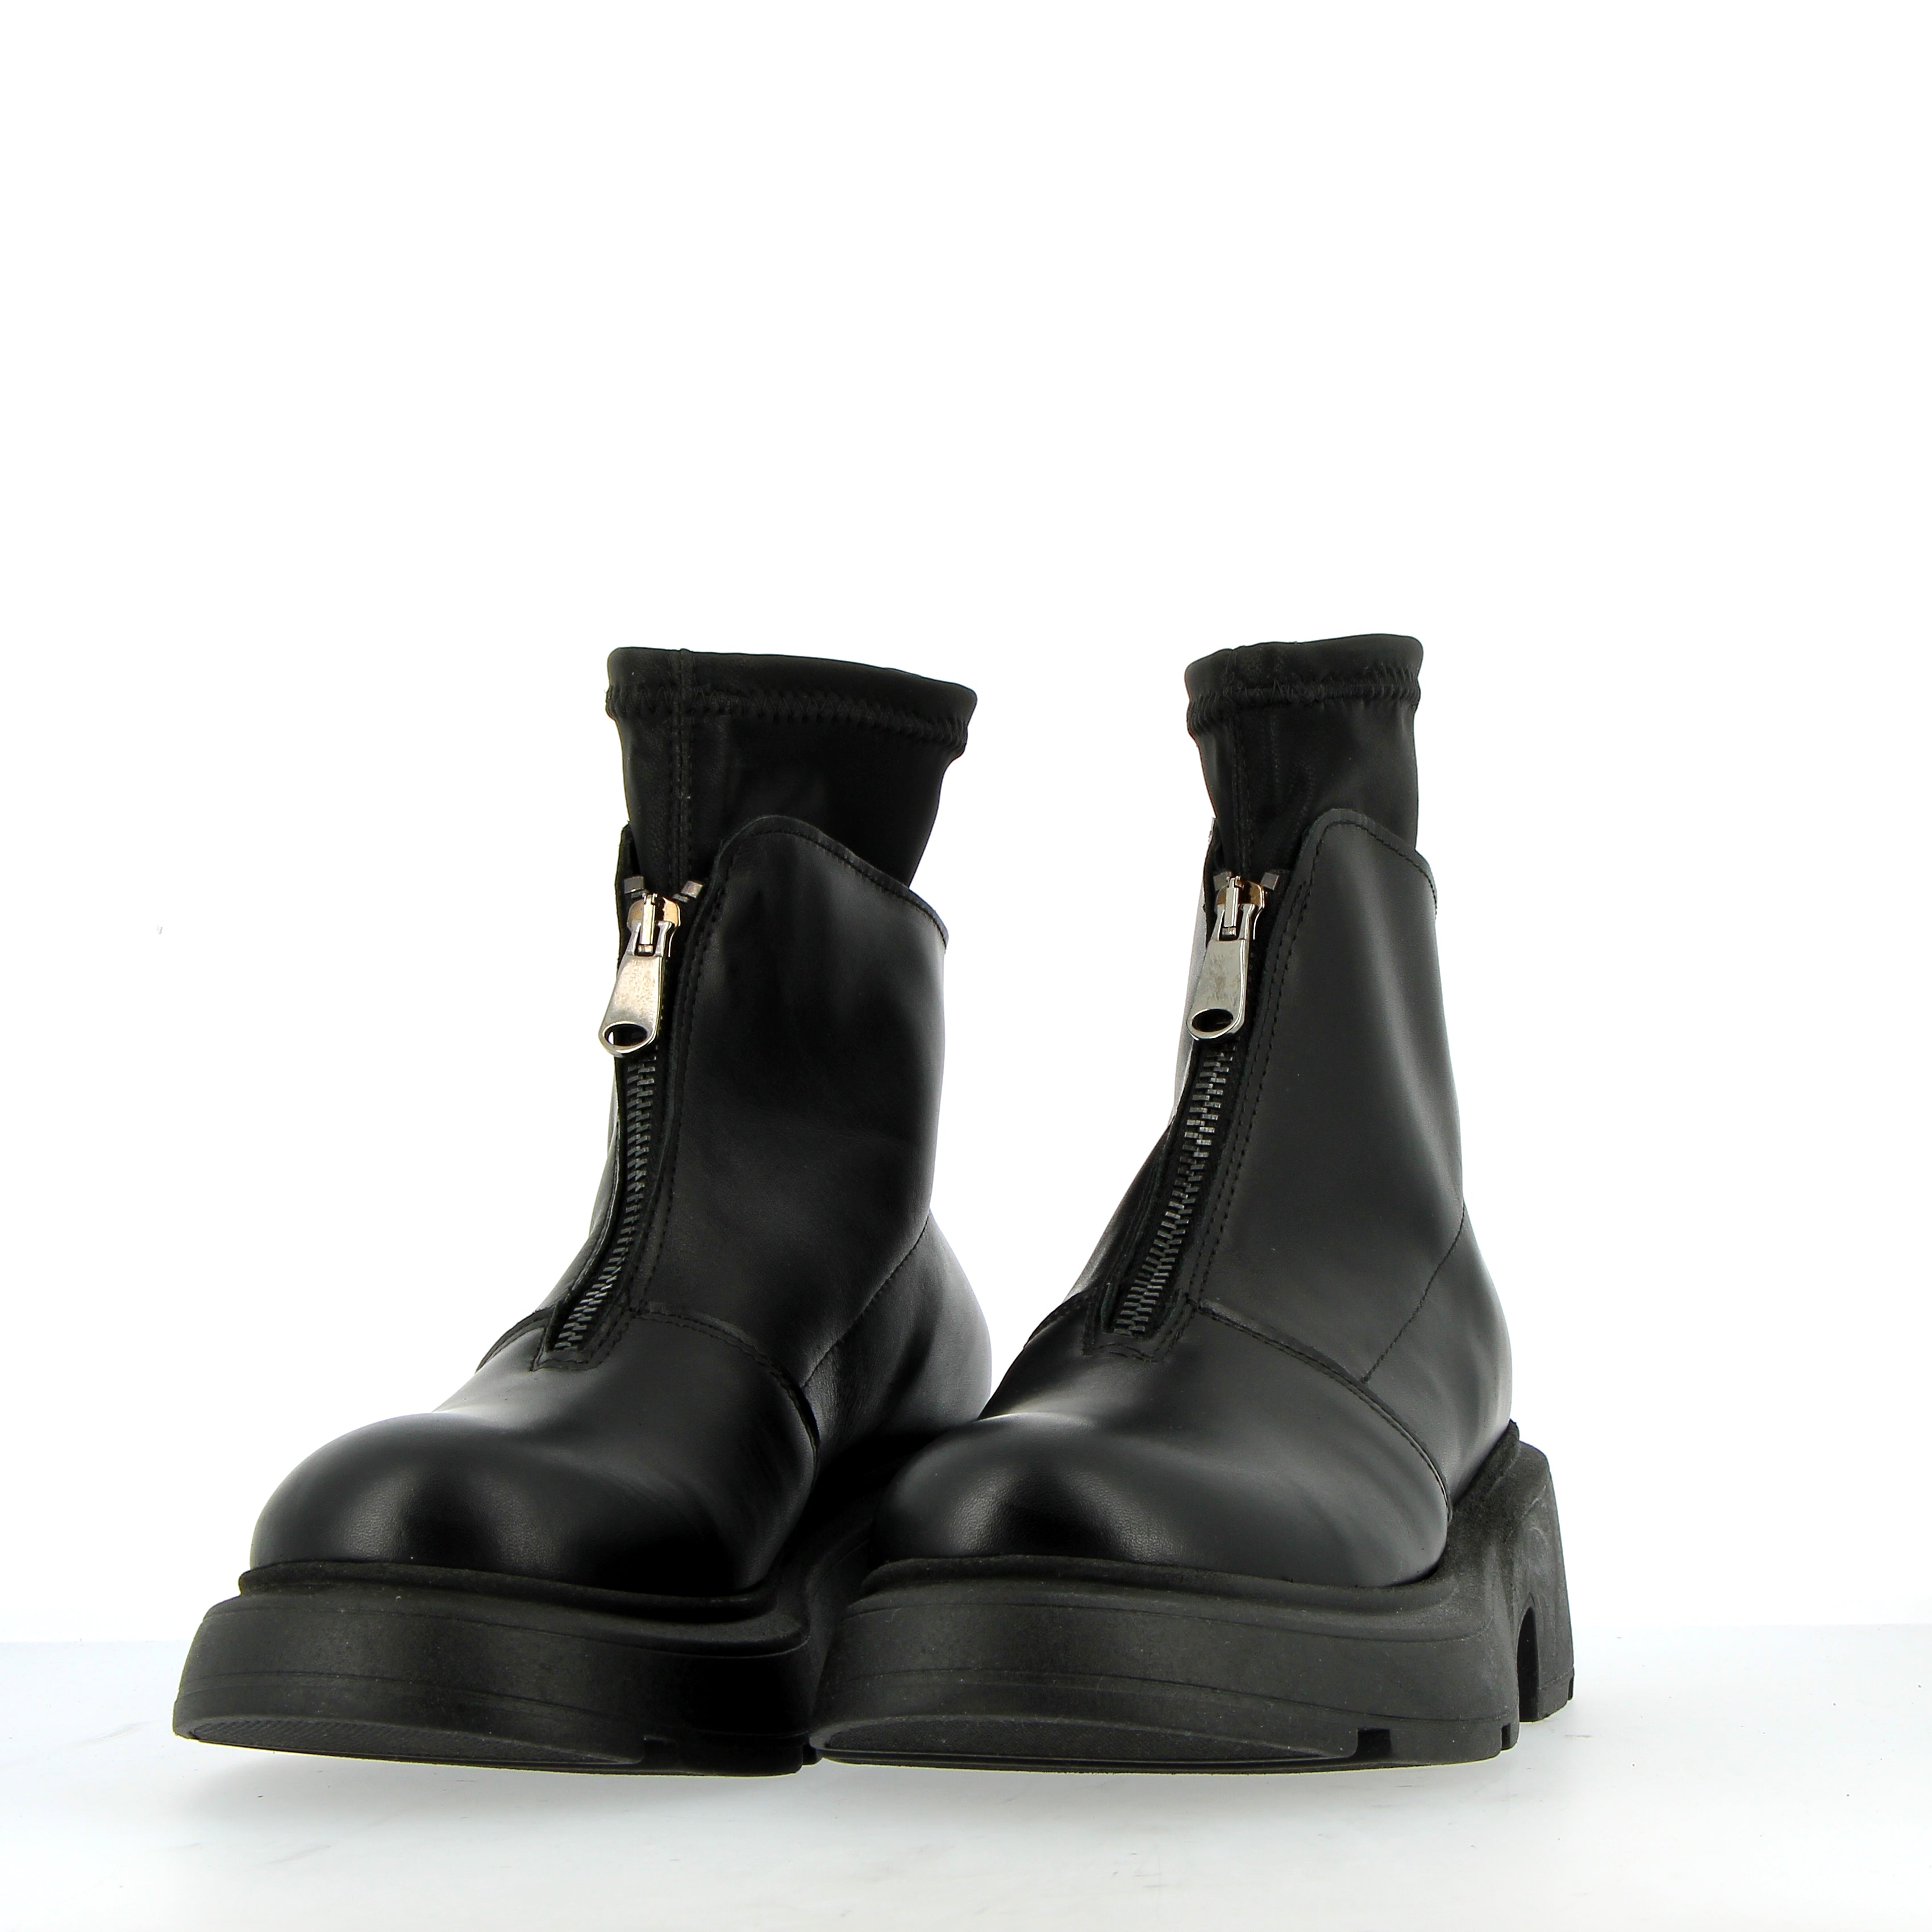 Zipped ankle boot in black leather